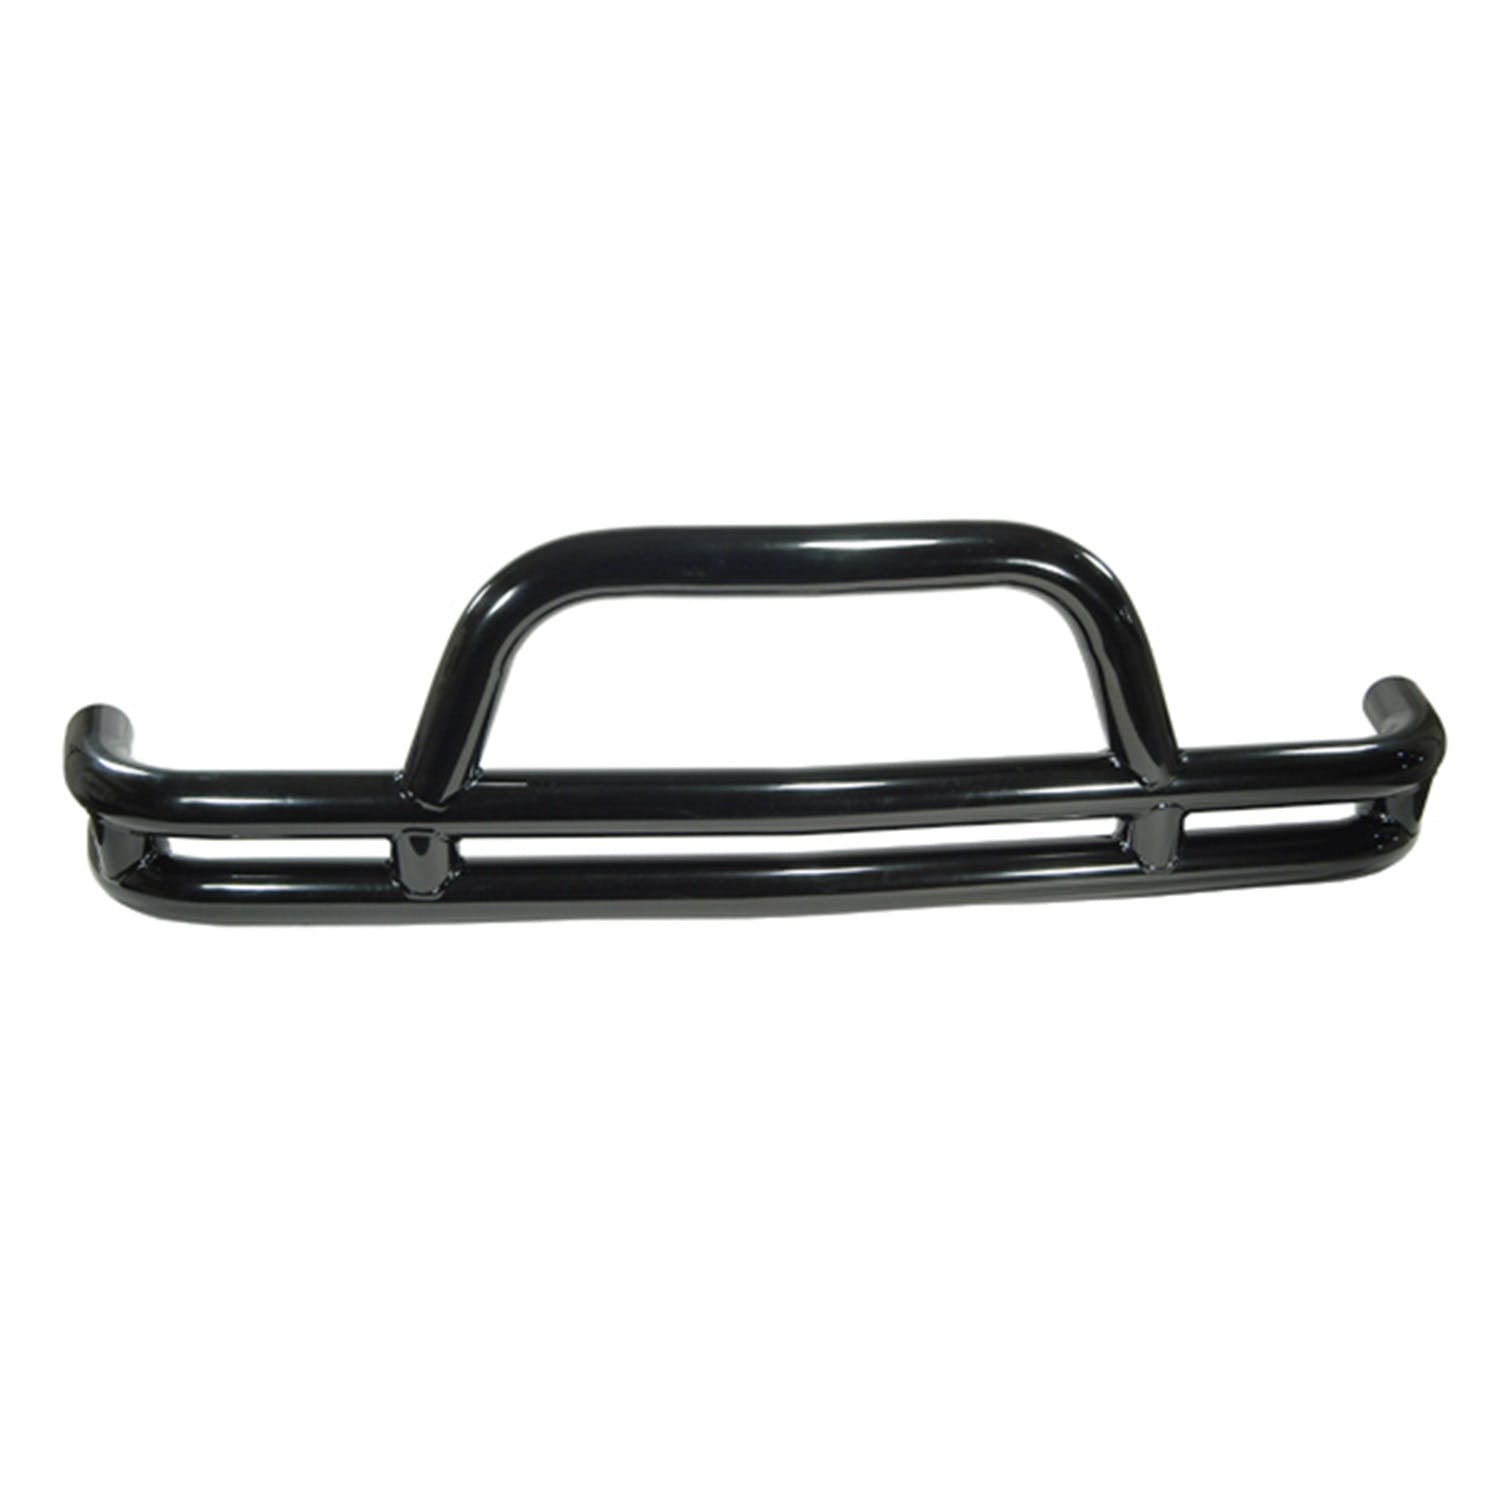 Rugged Ridge 11560.80 Double Tube Front Bumper, 3in